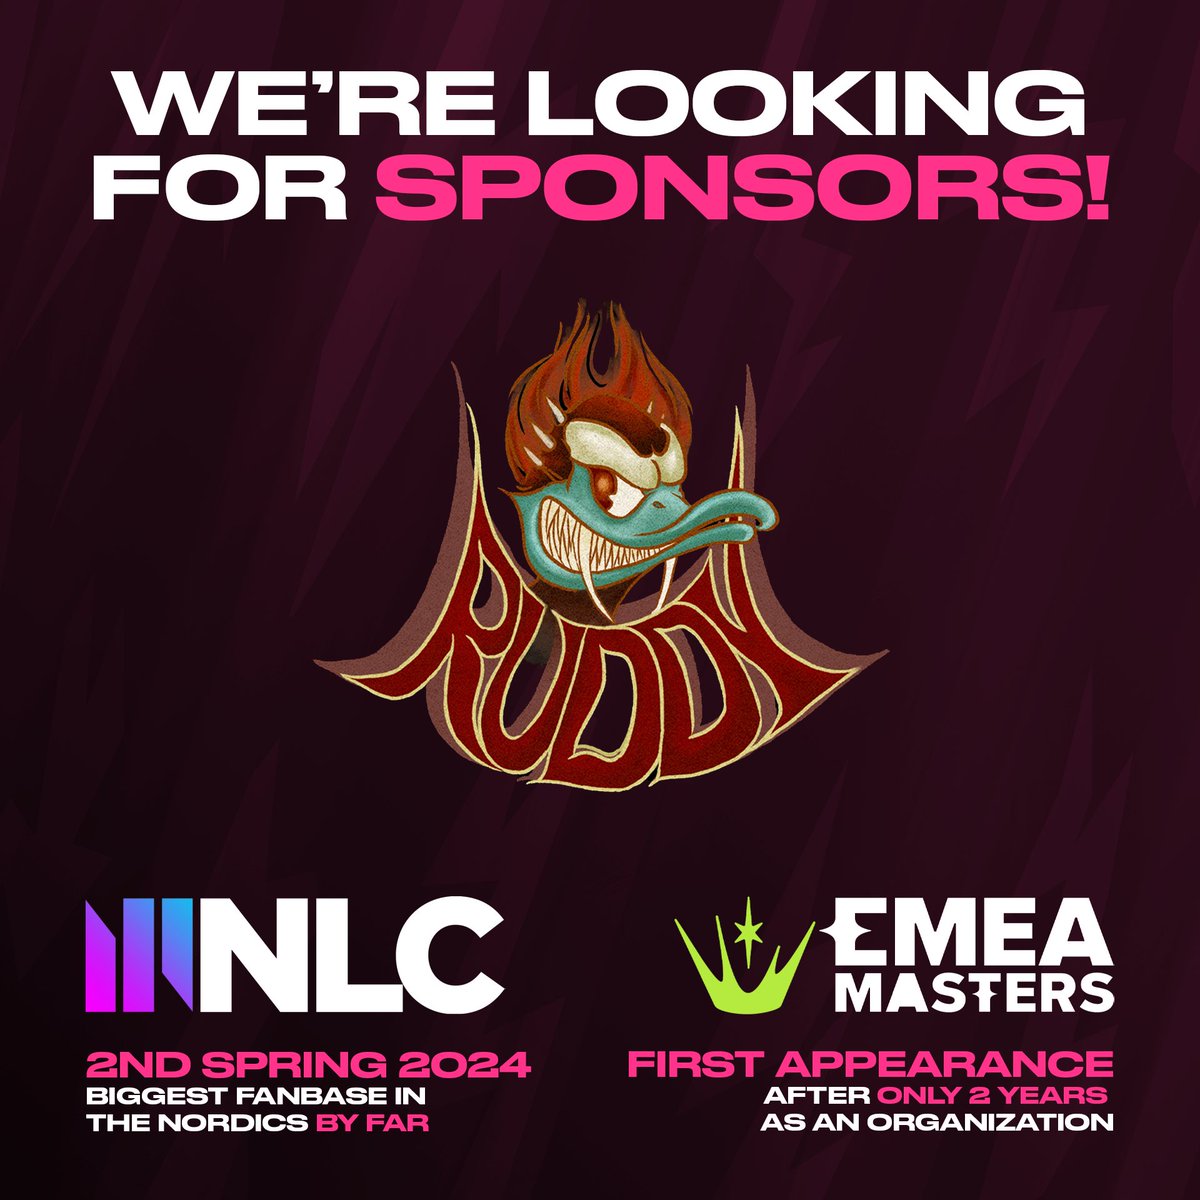 Ruddy Esports has been a largely self-funded operation till this point. However, we now feel as if we’ve scaled enough to be actively seeking sponsorship for this EMEA masters and the foreseeable future. Contact Harry@ruddy.gg RTs appreciated! #SAVENLC